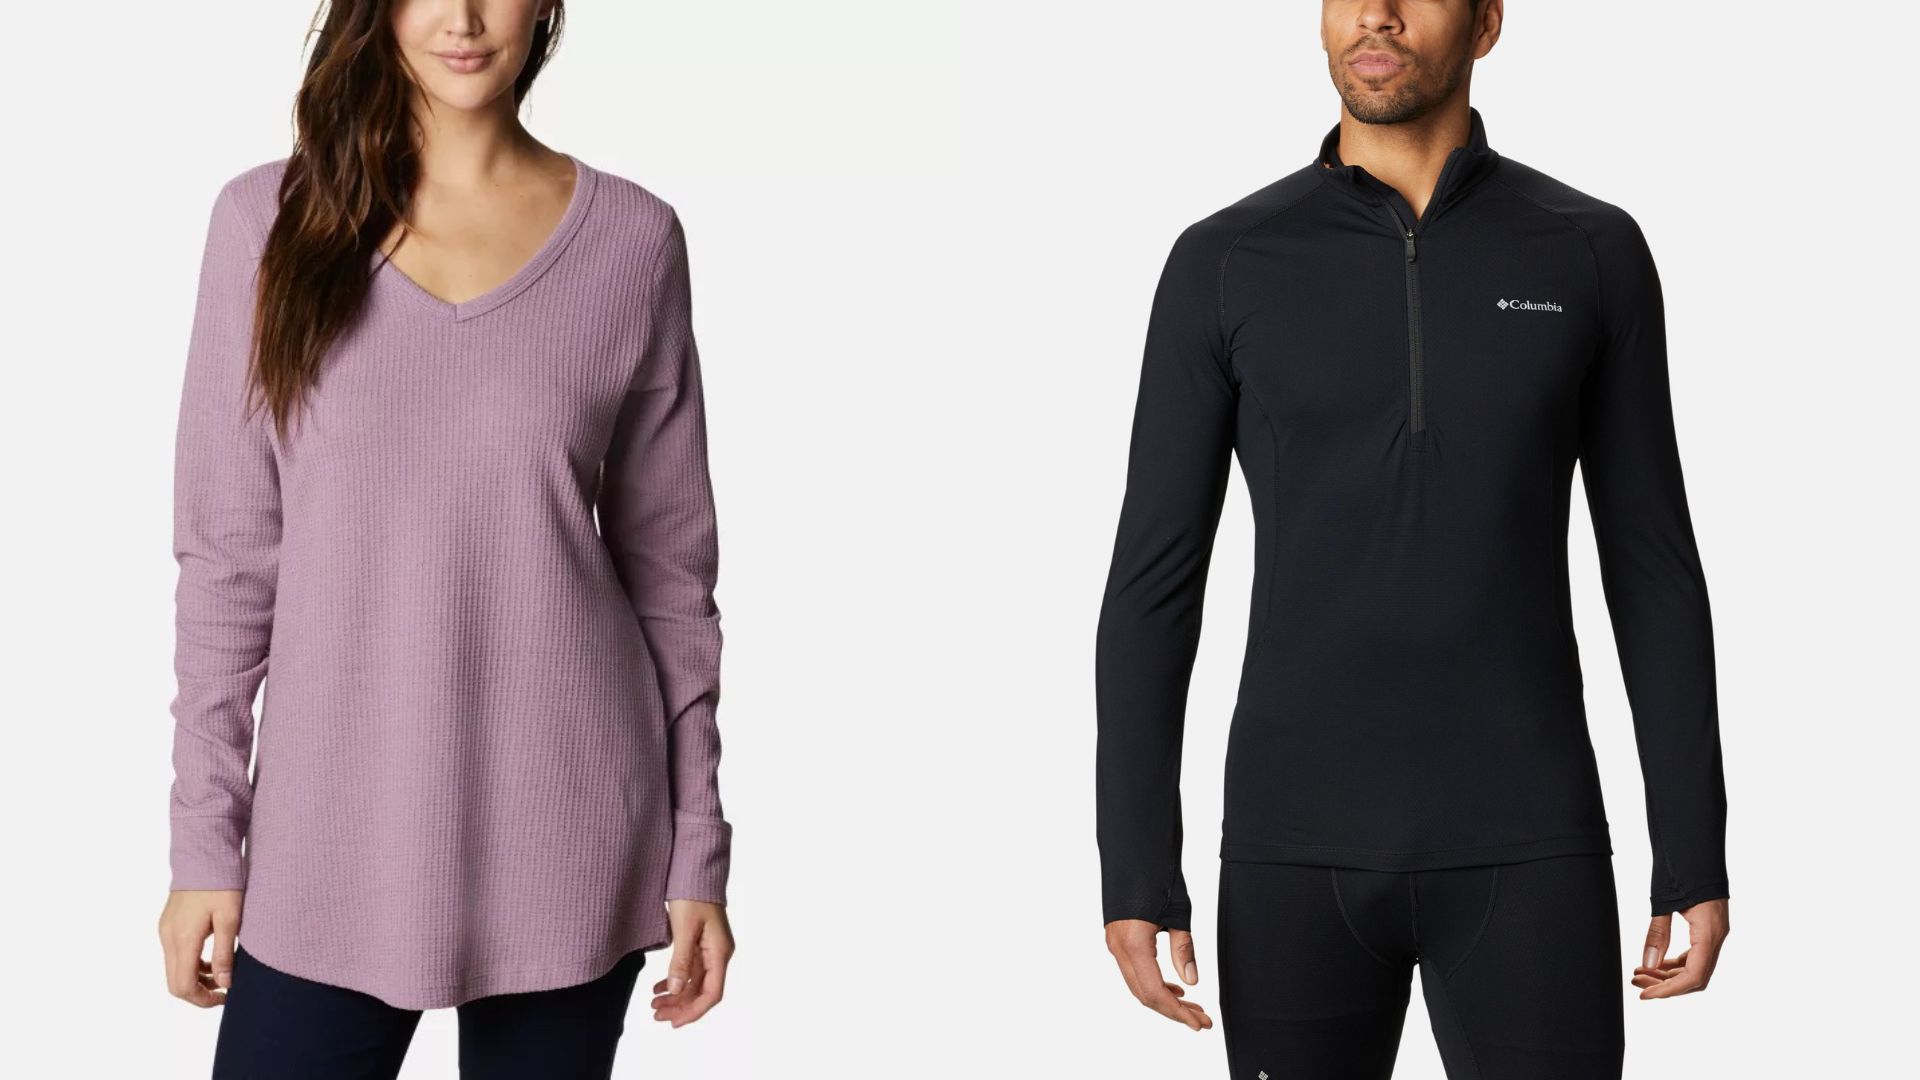 Thermals is an essential part of winter clothes